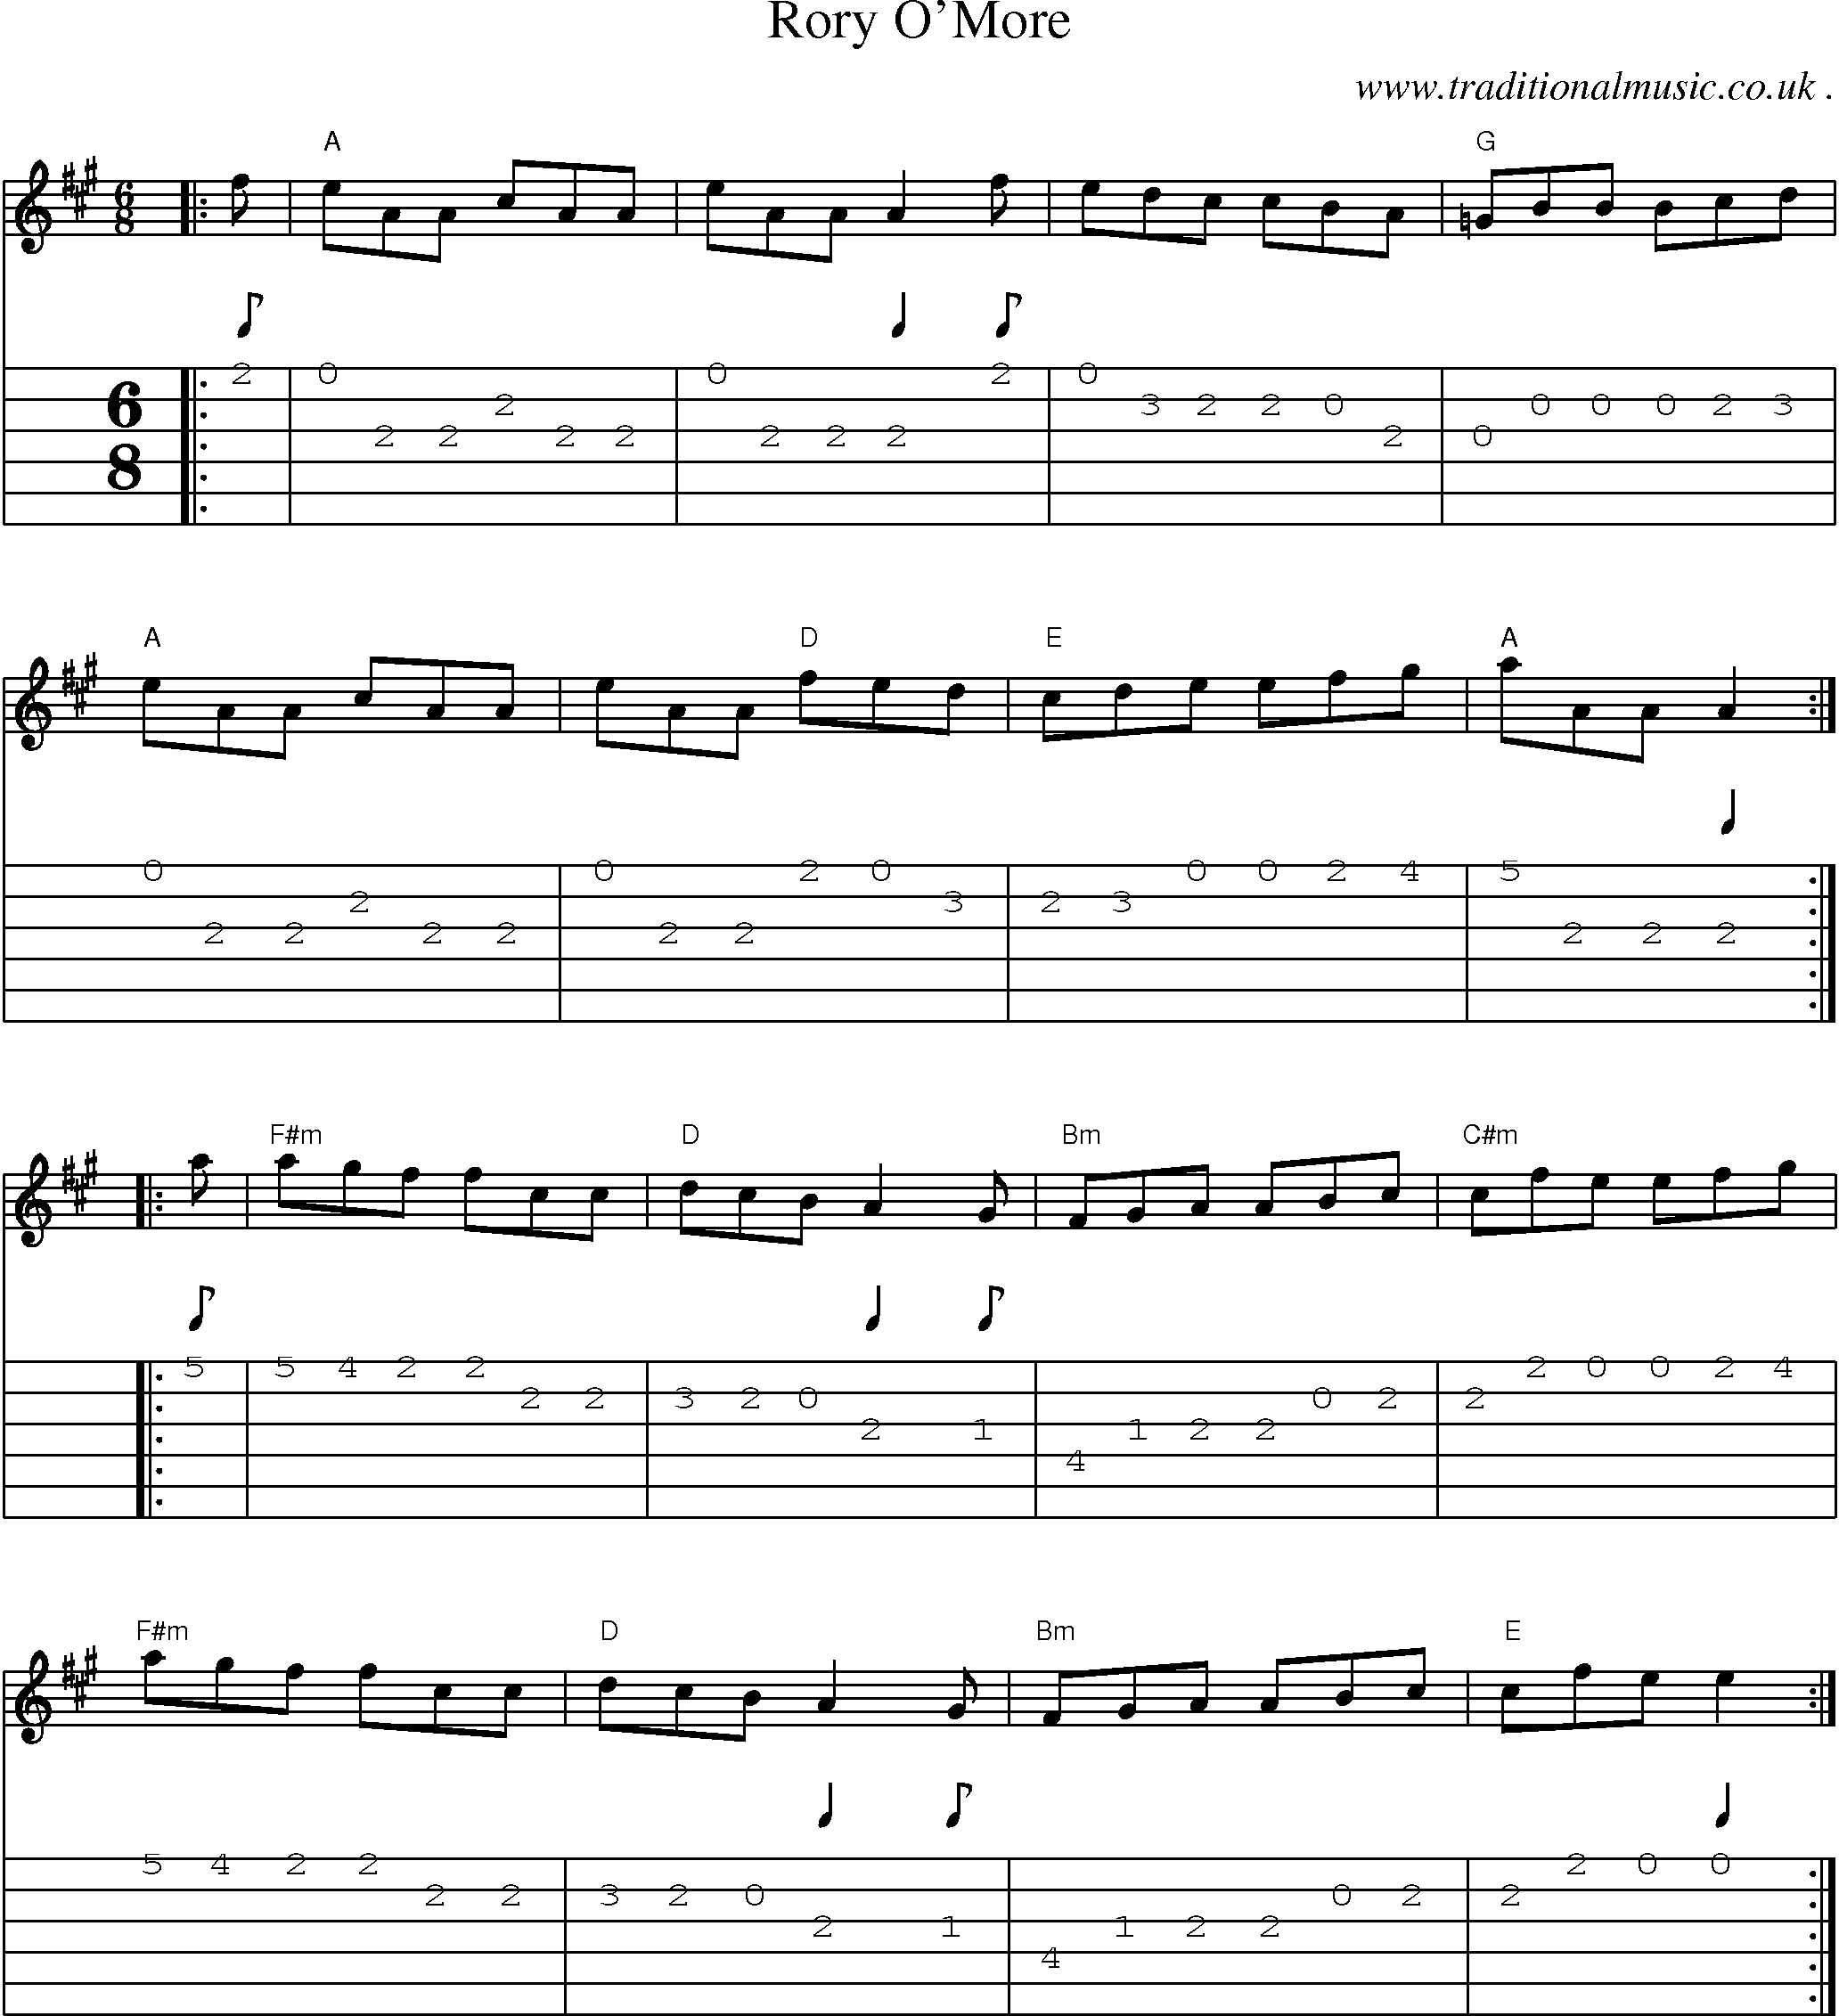 Music Score and Guitar Tabs for Rory Omore